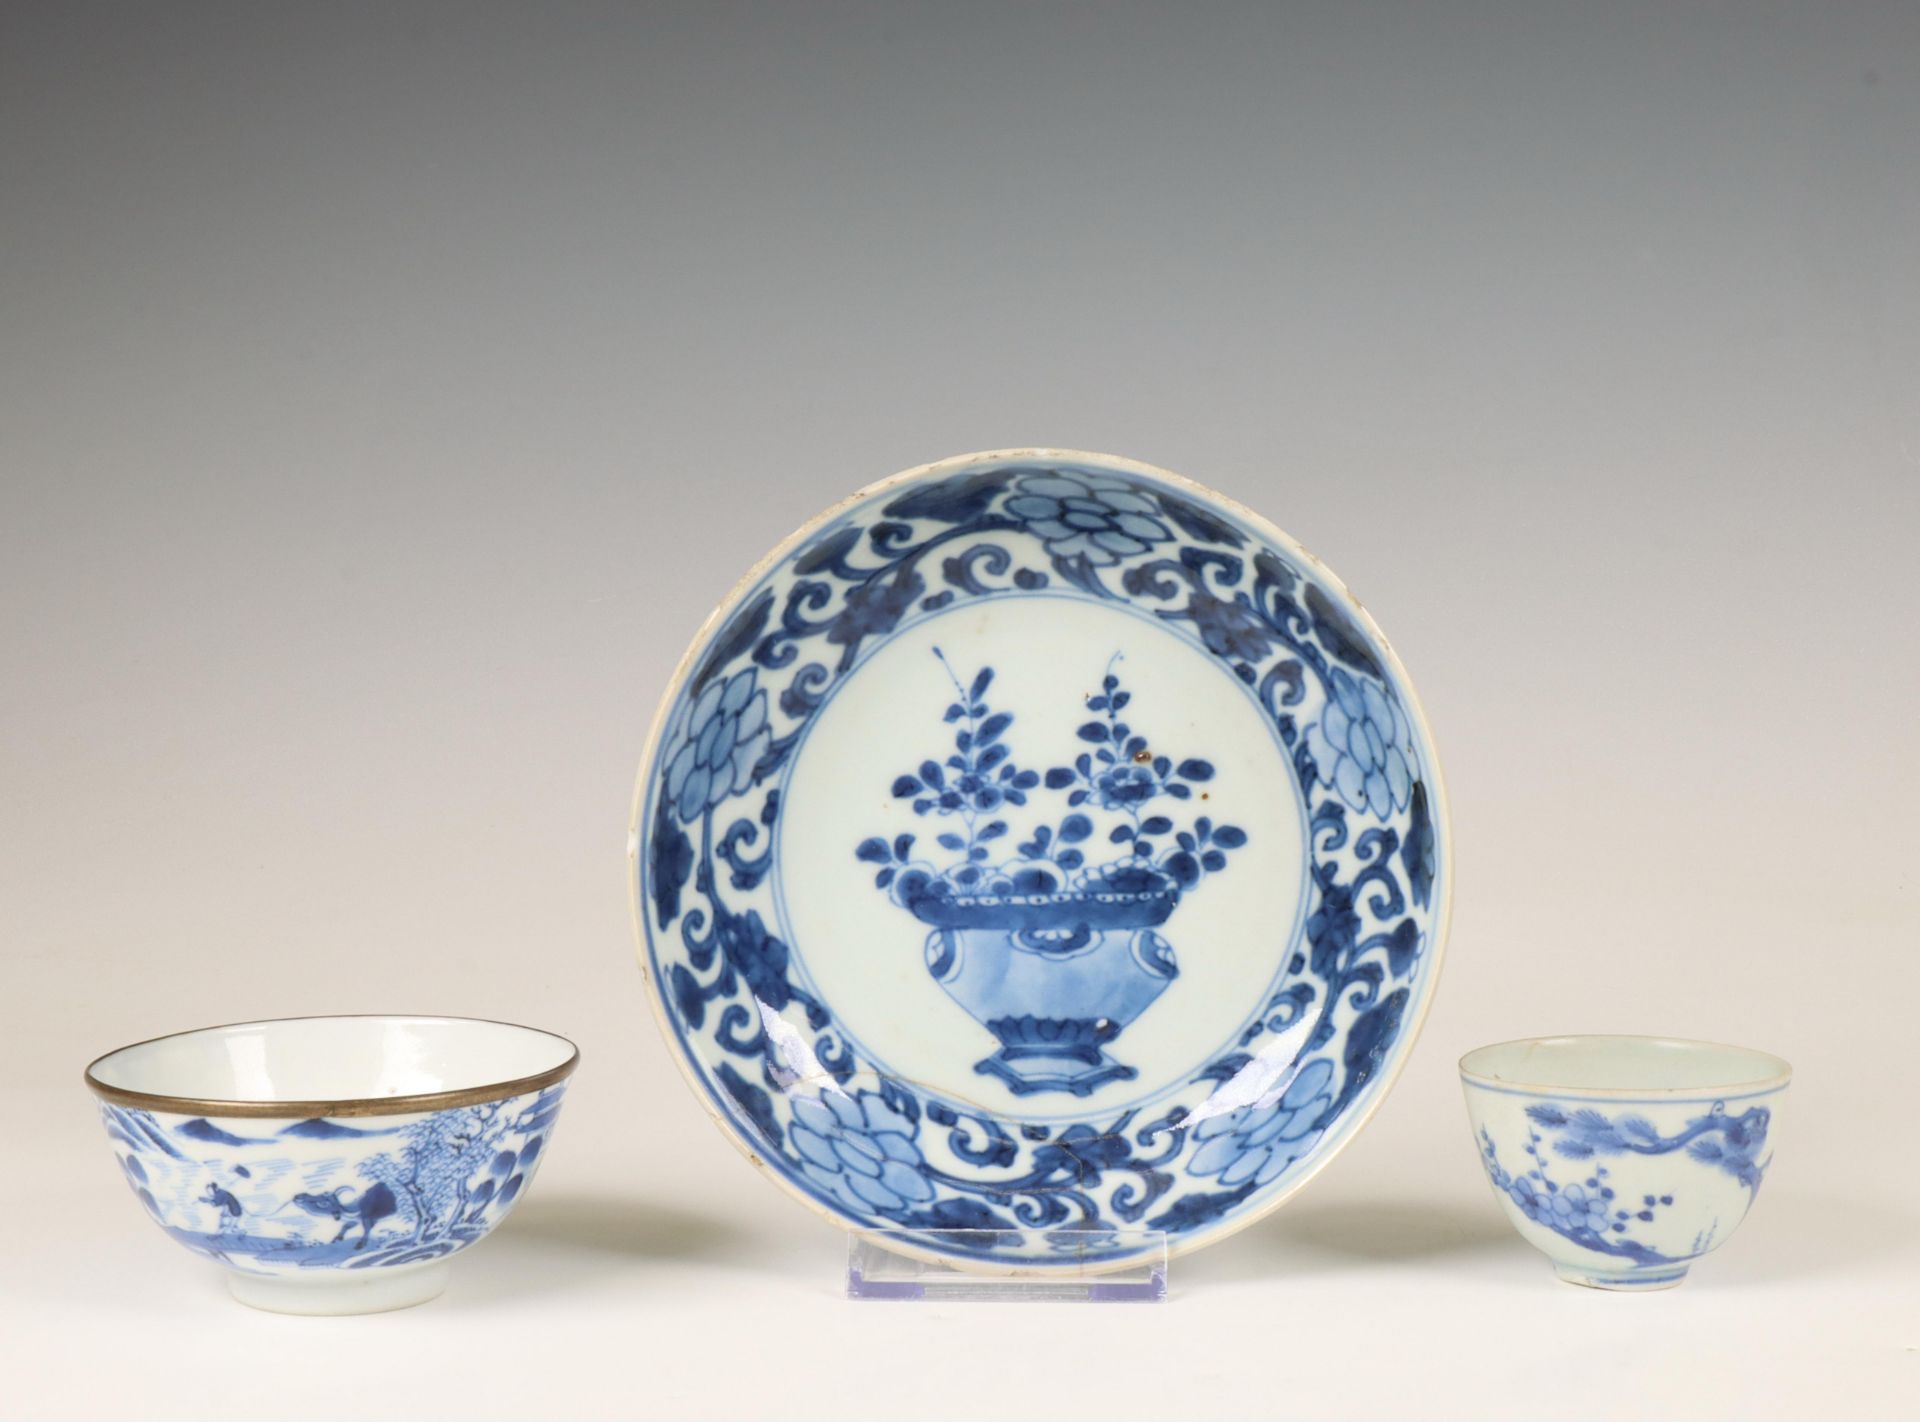 China, small collection of blue and white porcelain, 17th-18th century,